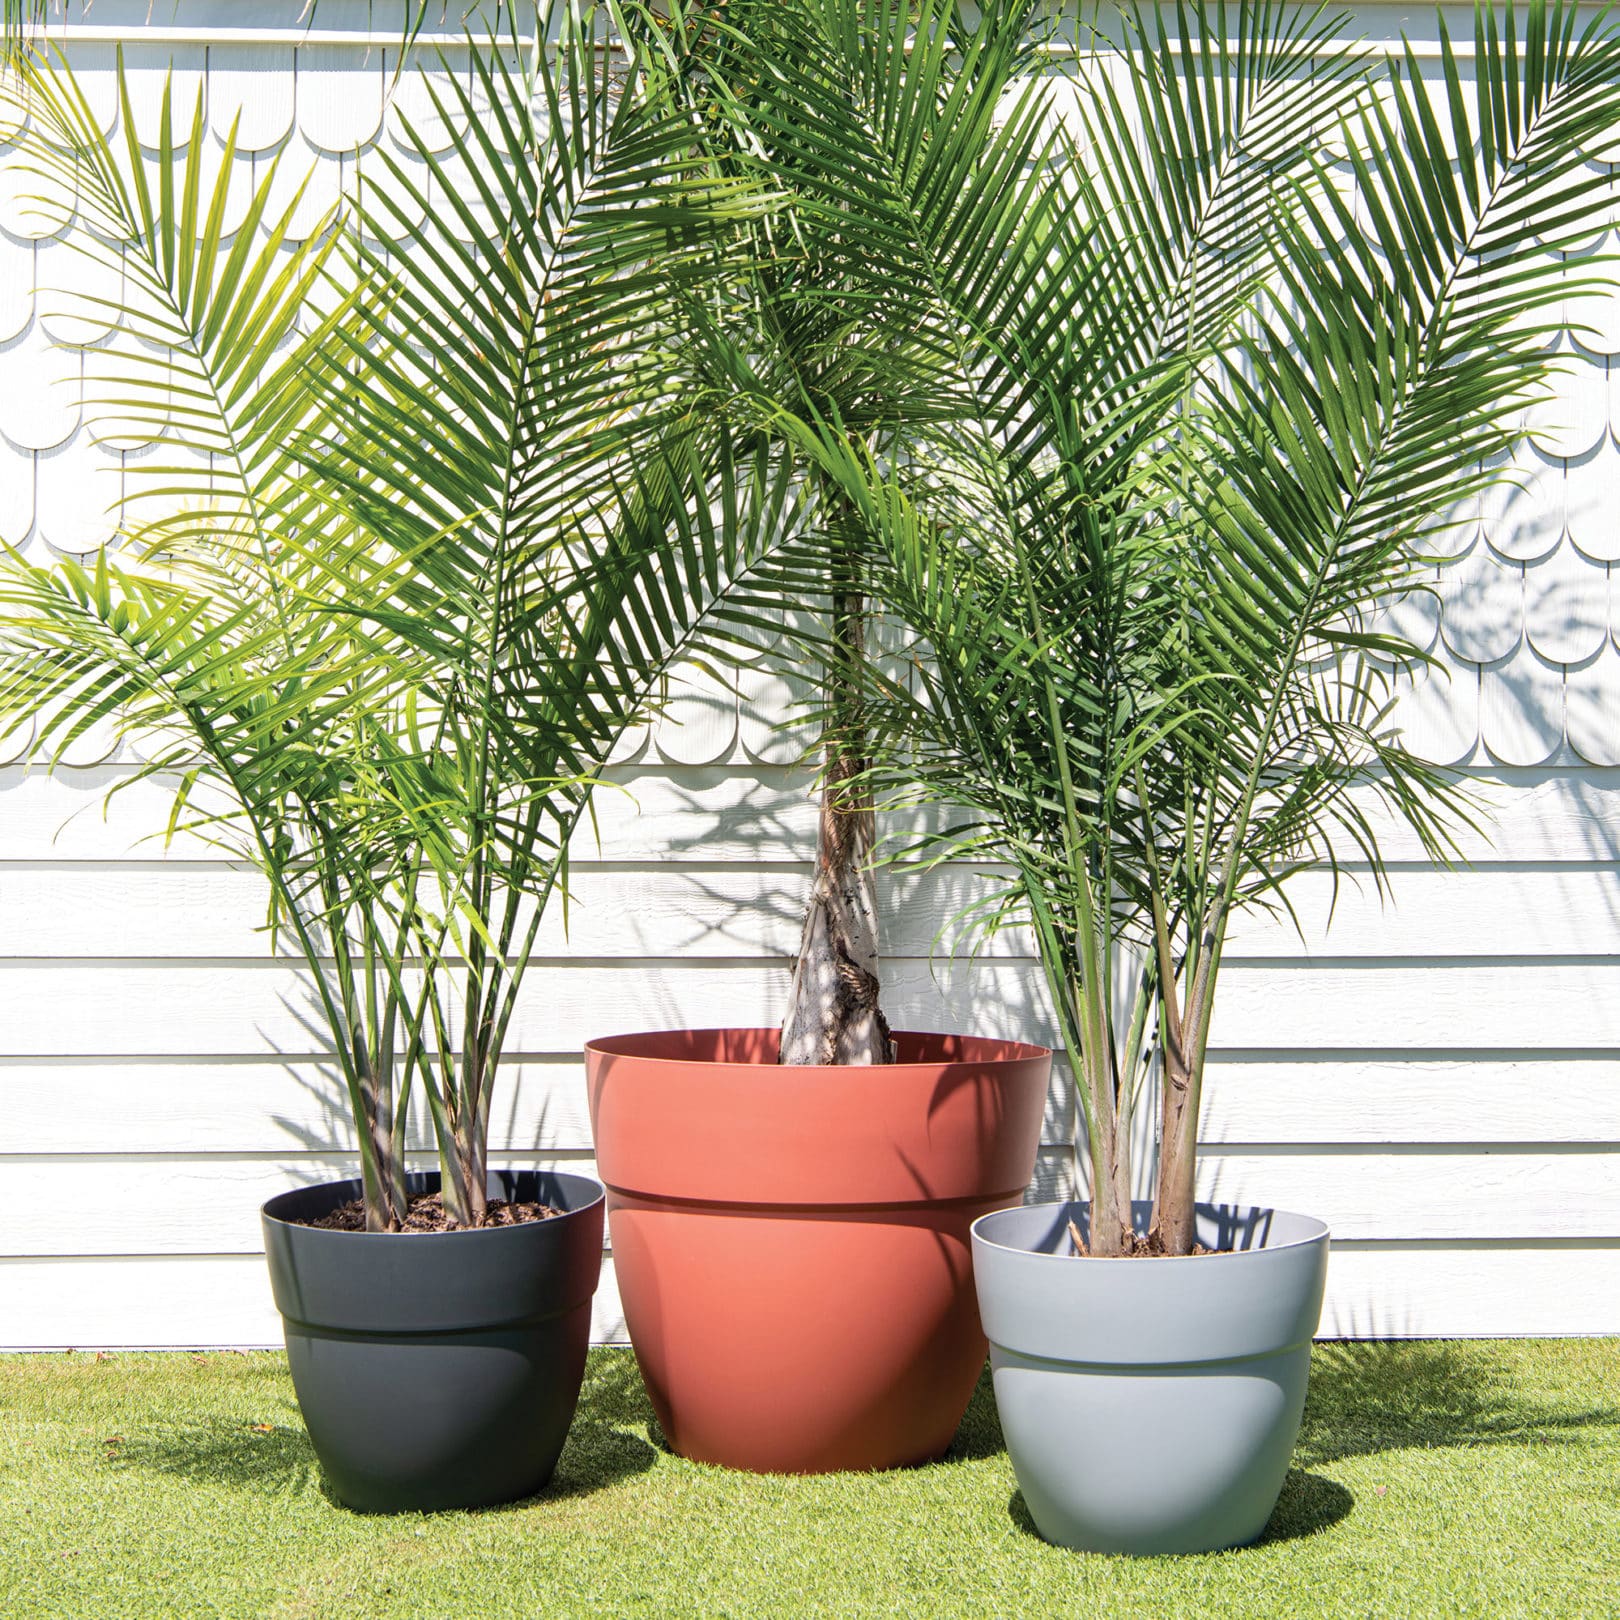 family of ella planters with palms